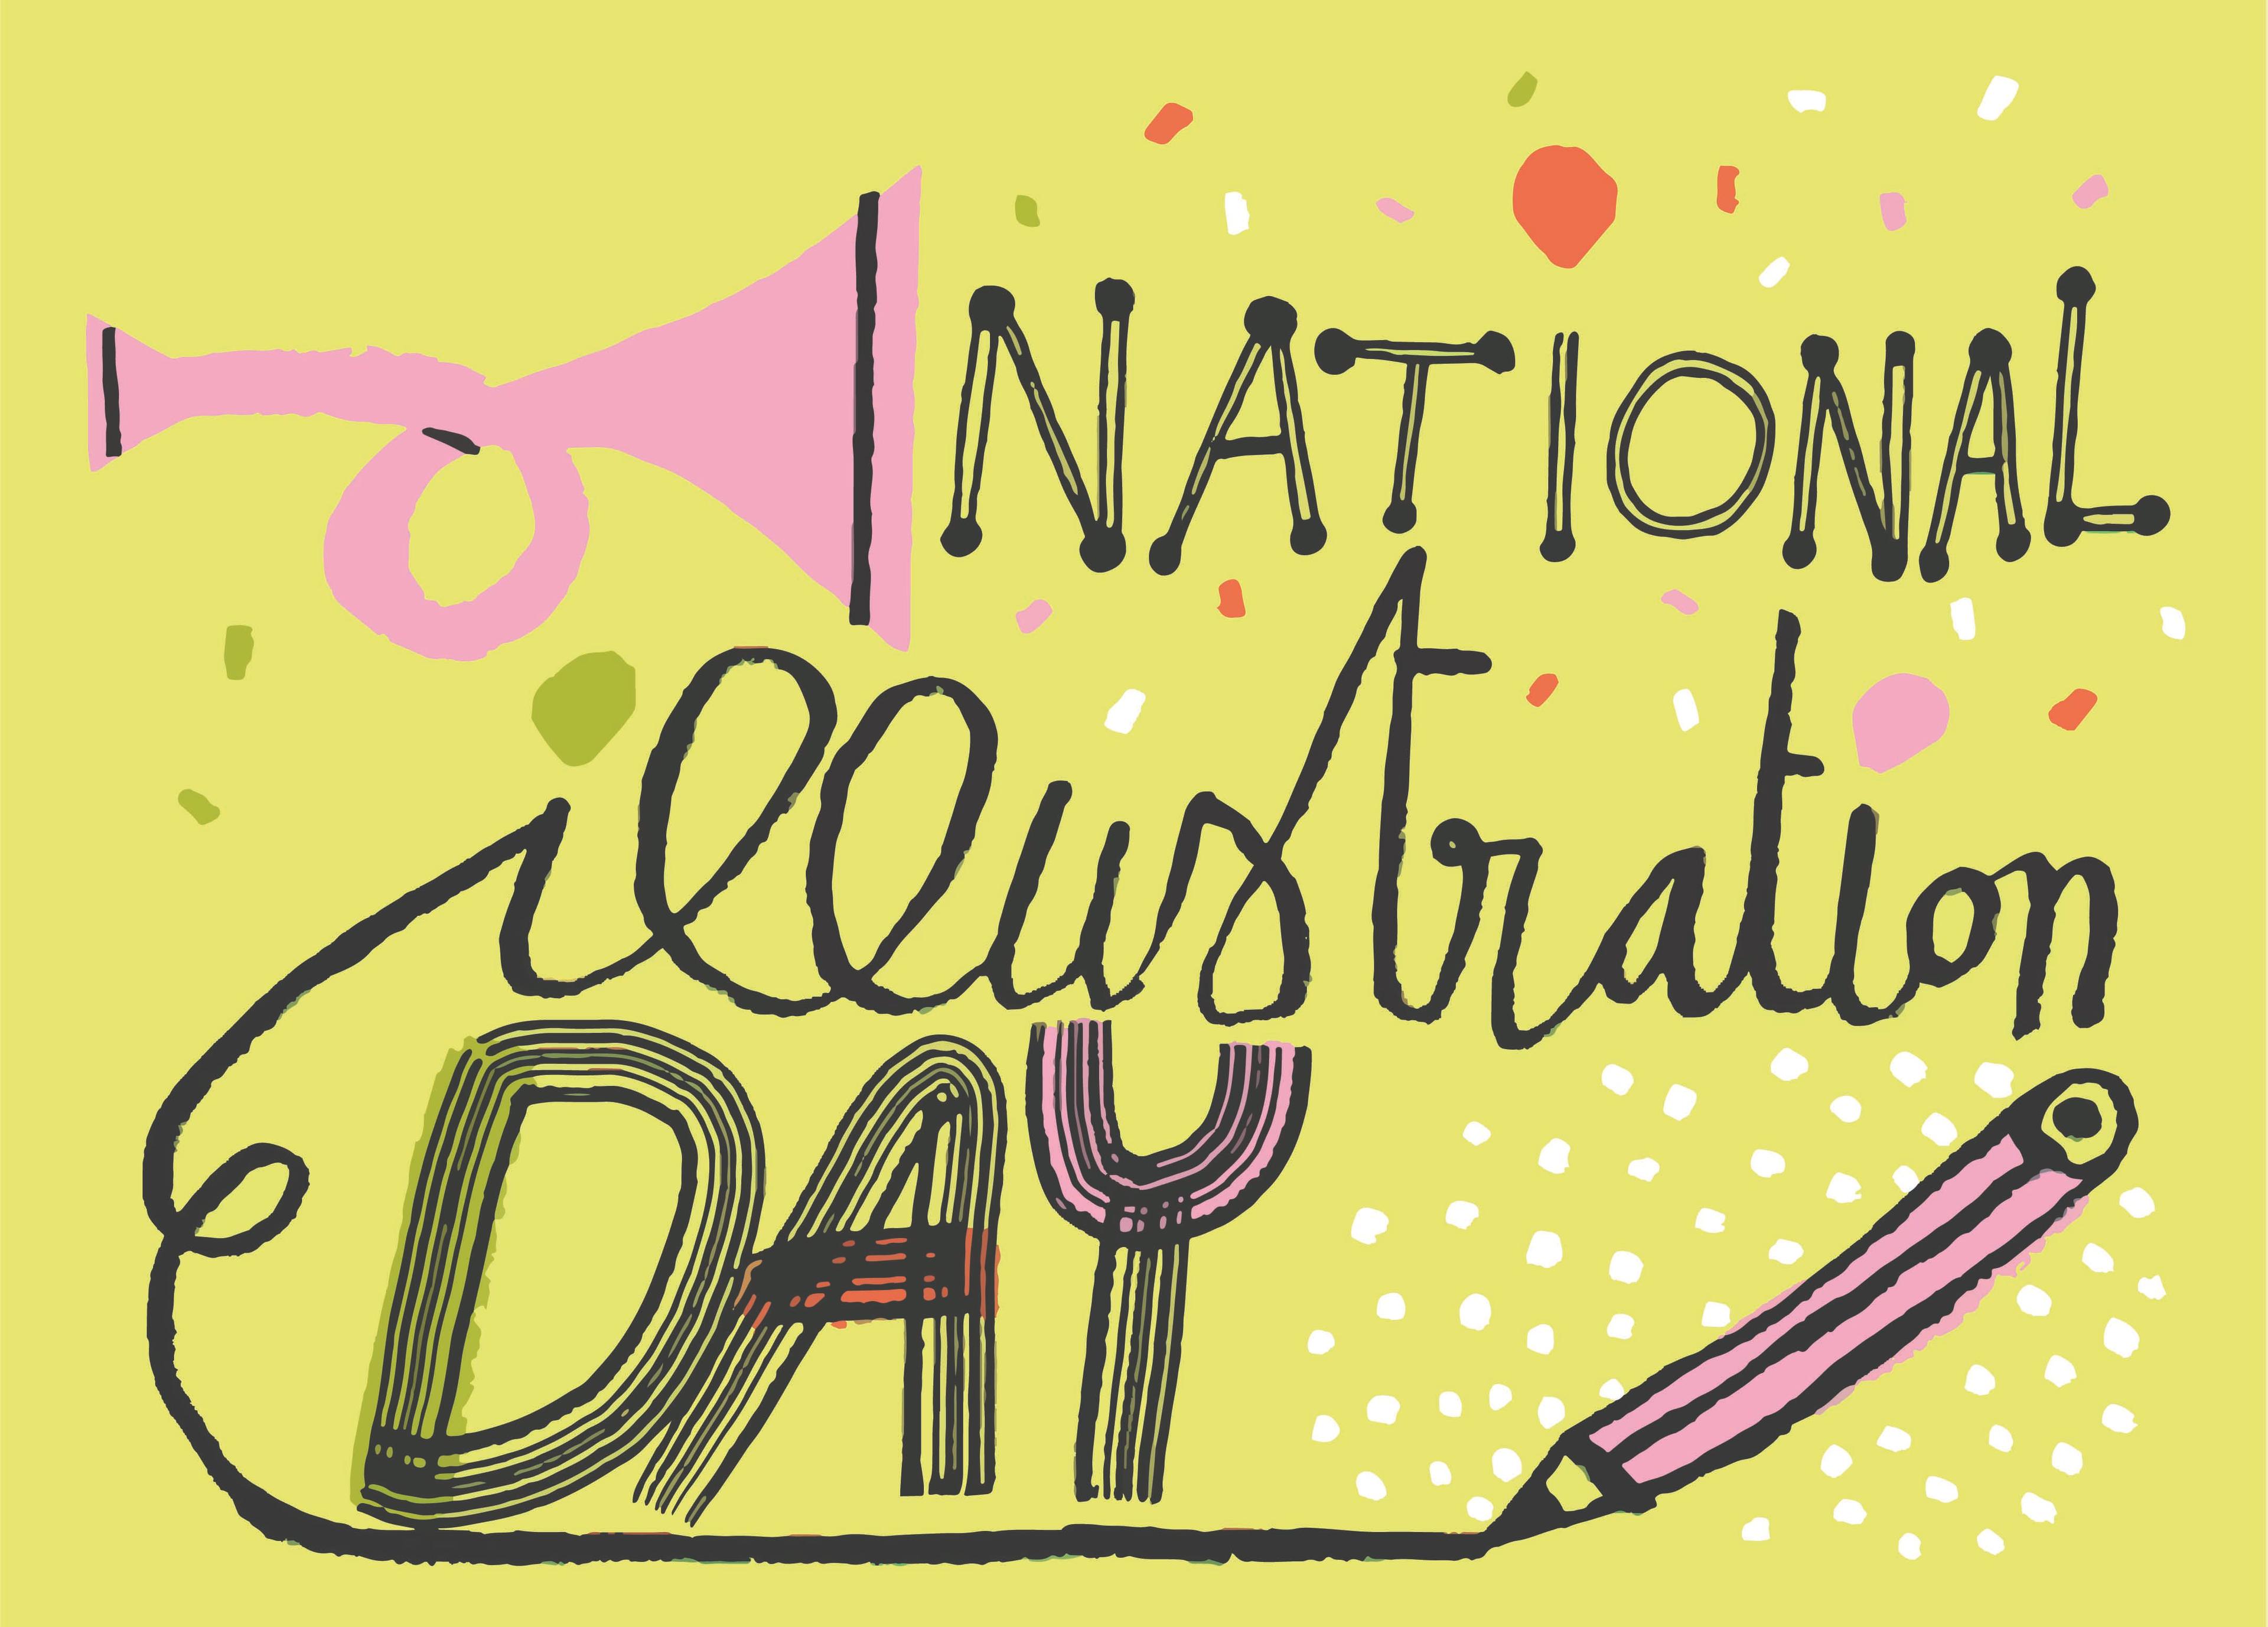 National Illustration Day logo on a greenish, yellow background with the text 'National Illustration Day'.